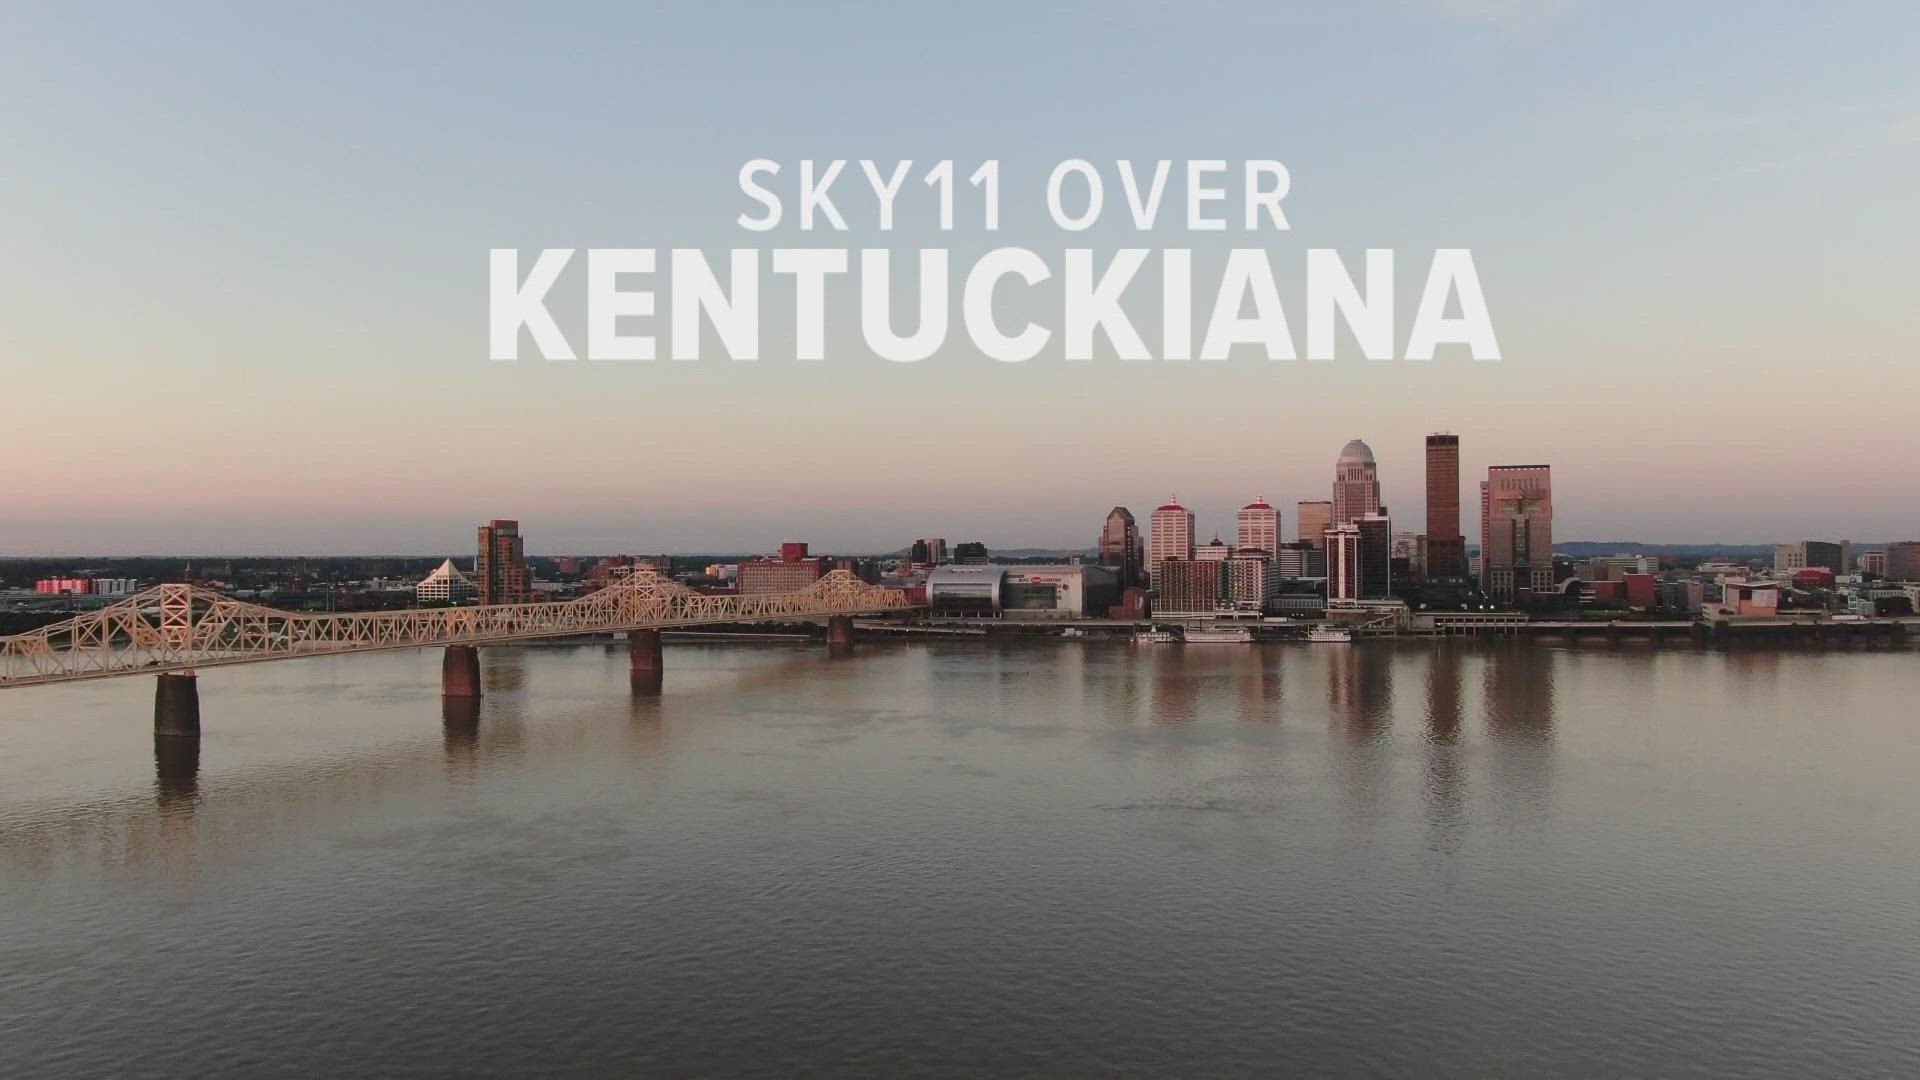 WHAS11 photojournalists have captured breathtaking, scenic views of Kentucky and southern Indiana with our Sky11 drone.